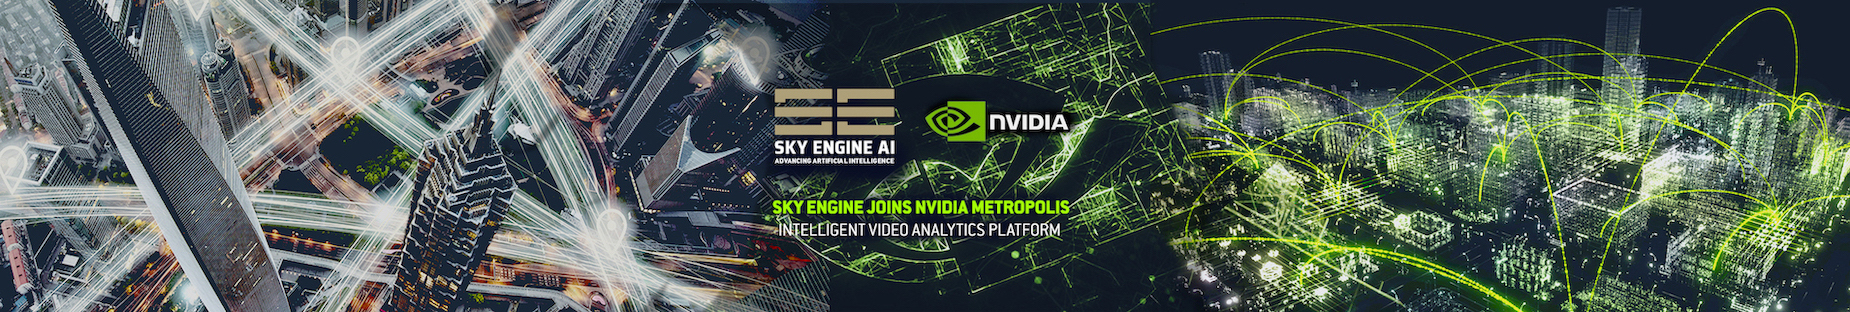 SKY ENGINE AI synthetic data simulation and generation for drones, telecommunication, energy, healthcare, manufacturing, face recognition, automotive, construction, agriculture